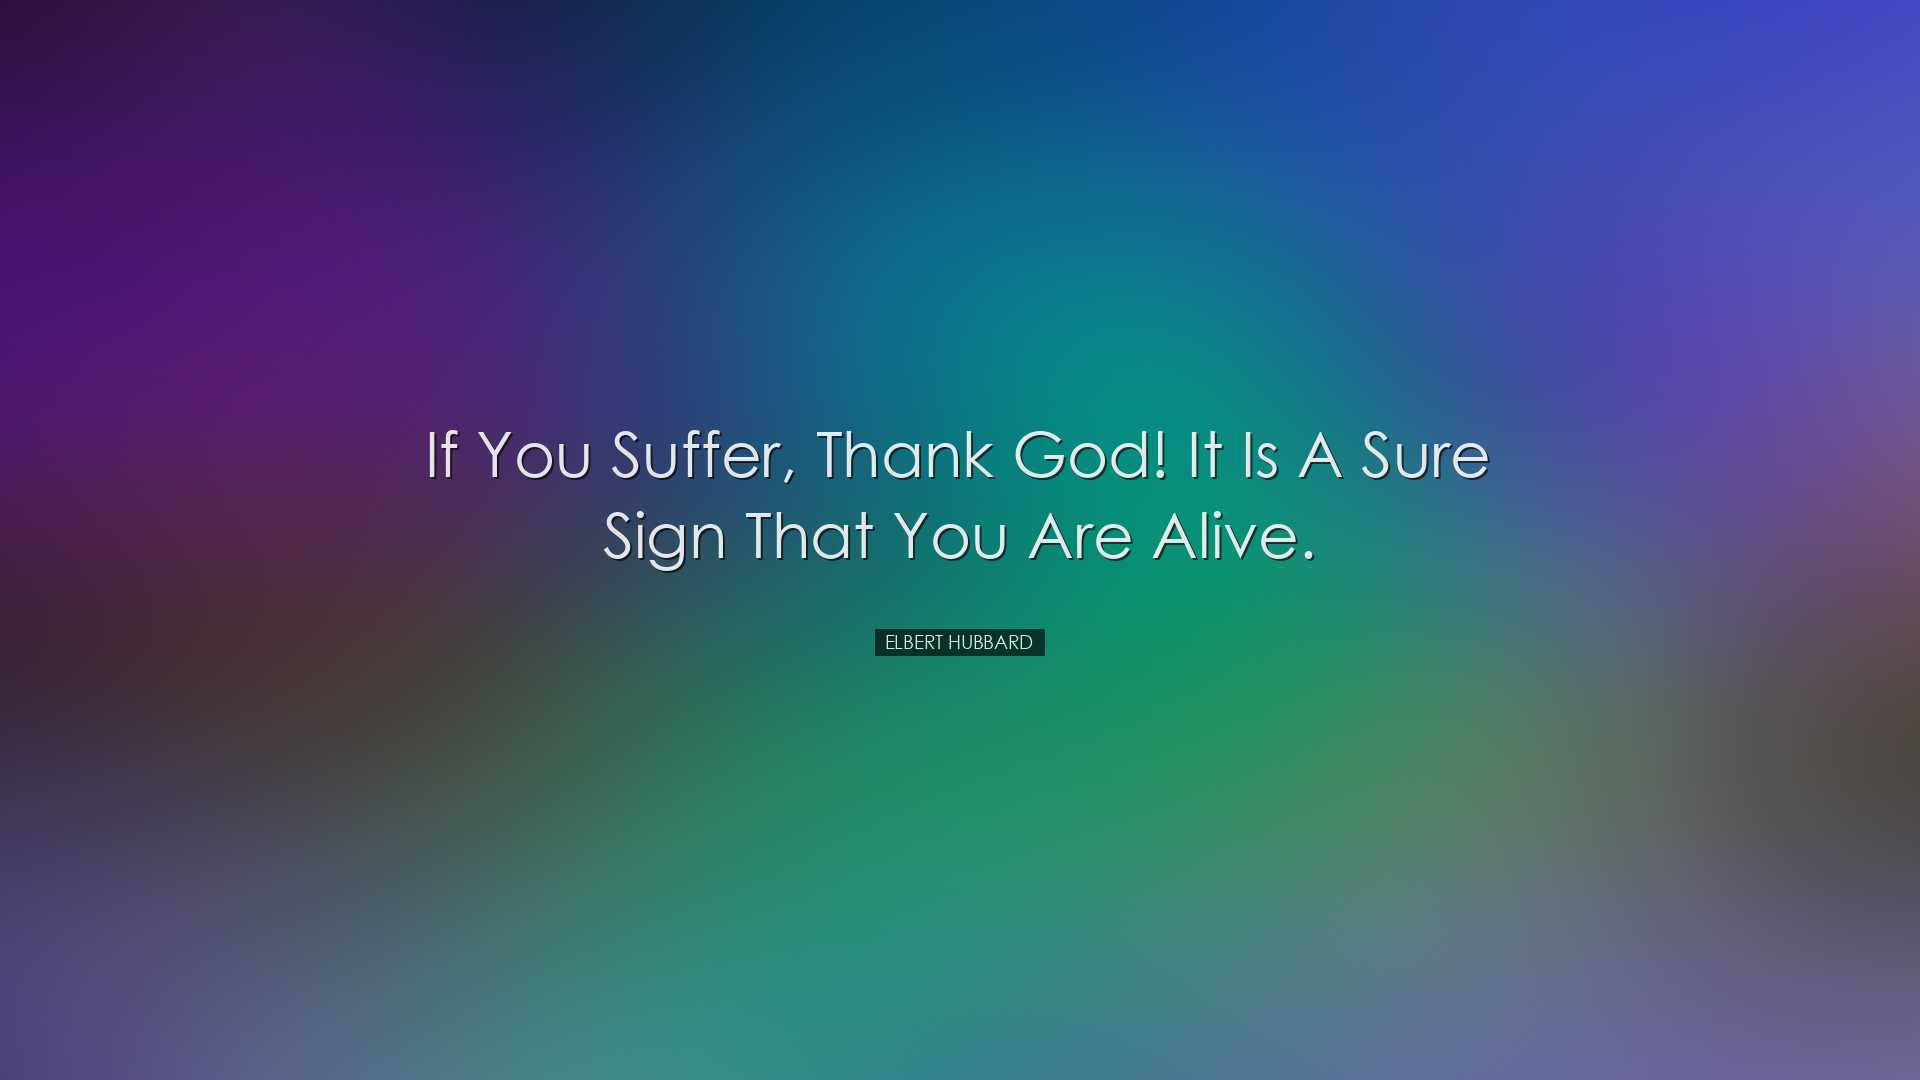 If you suffer, thank God! It is a sure sign that you are alive. -